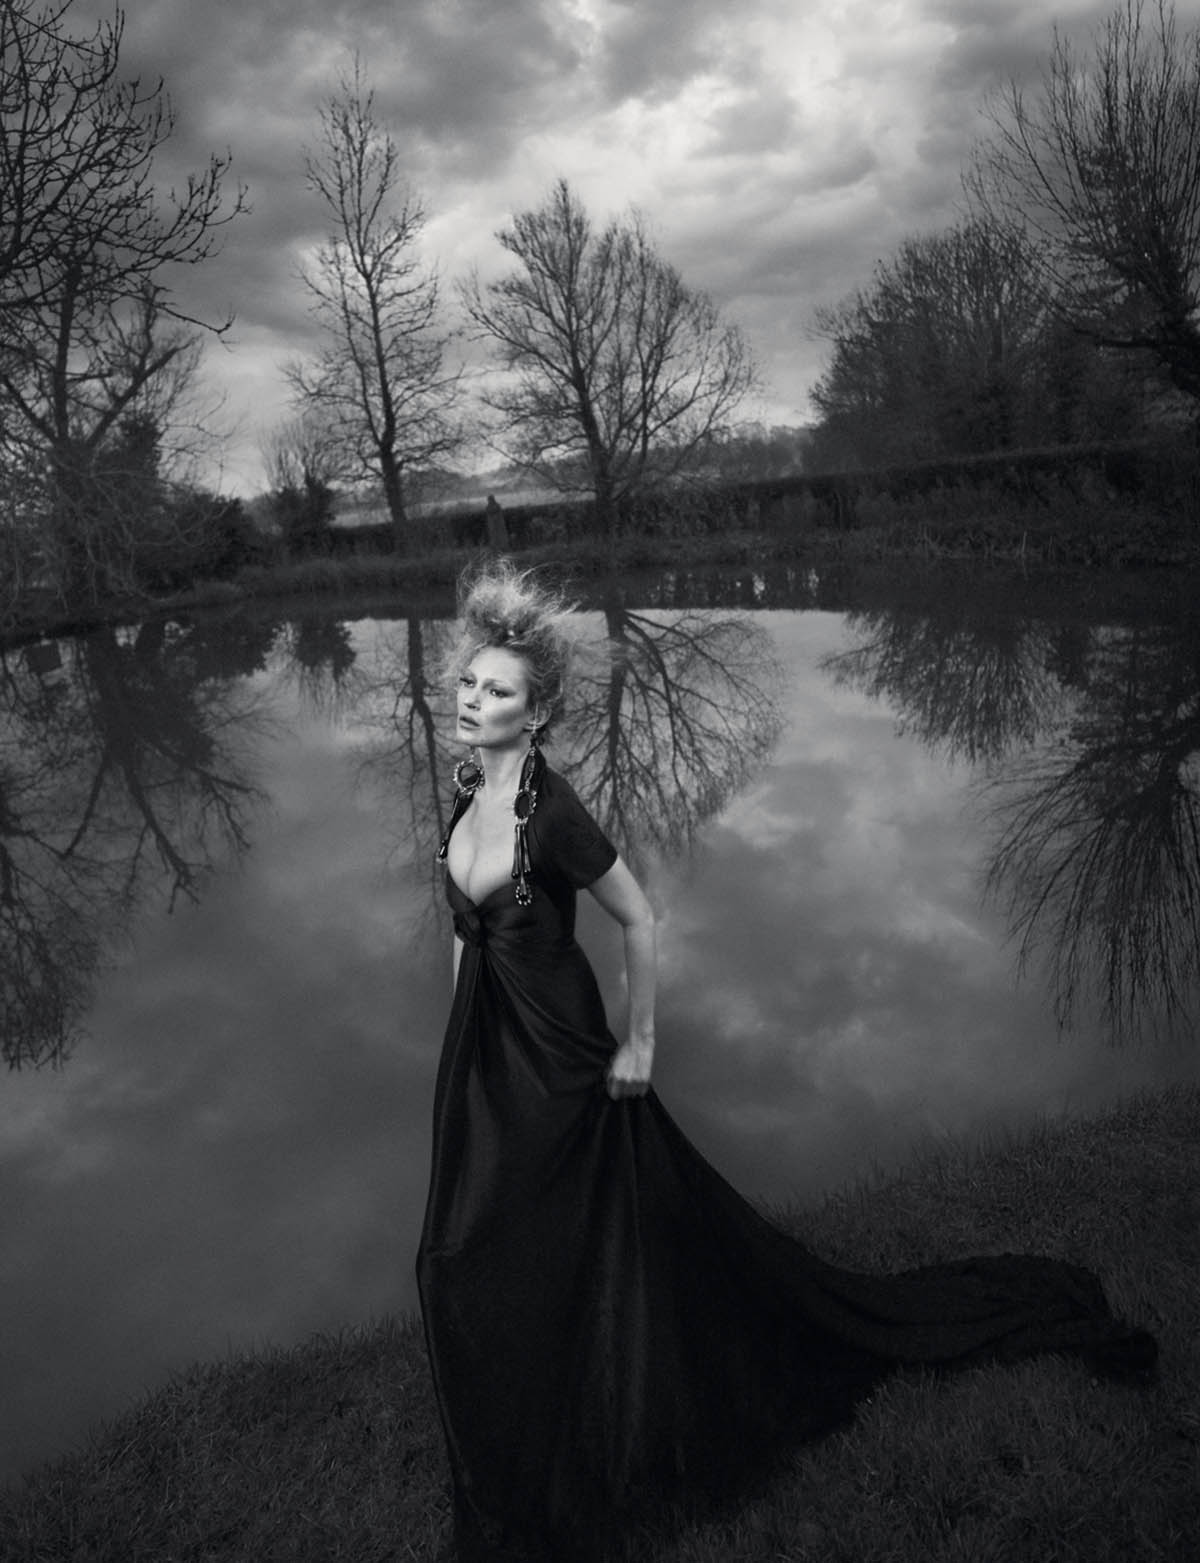 Kate Moss by Mert & Marcus for British Vogue March 2021